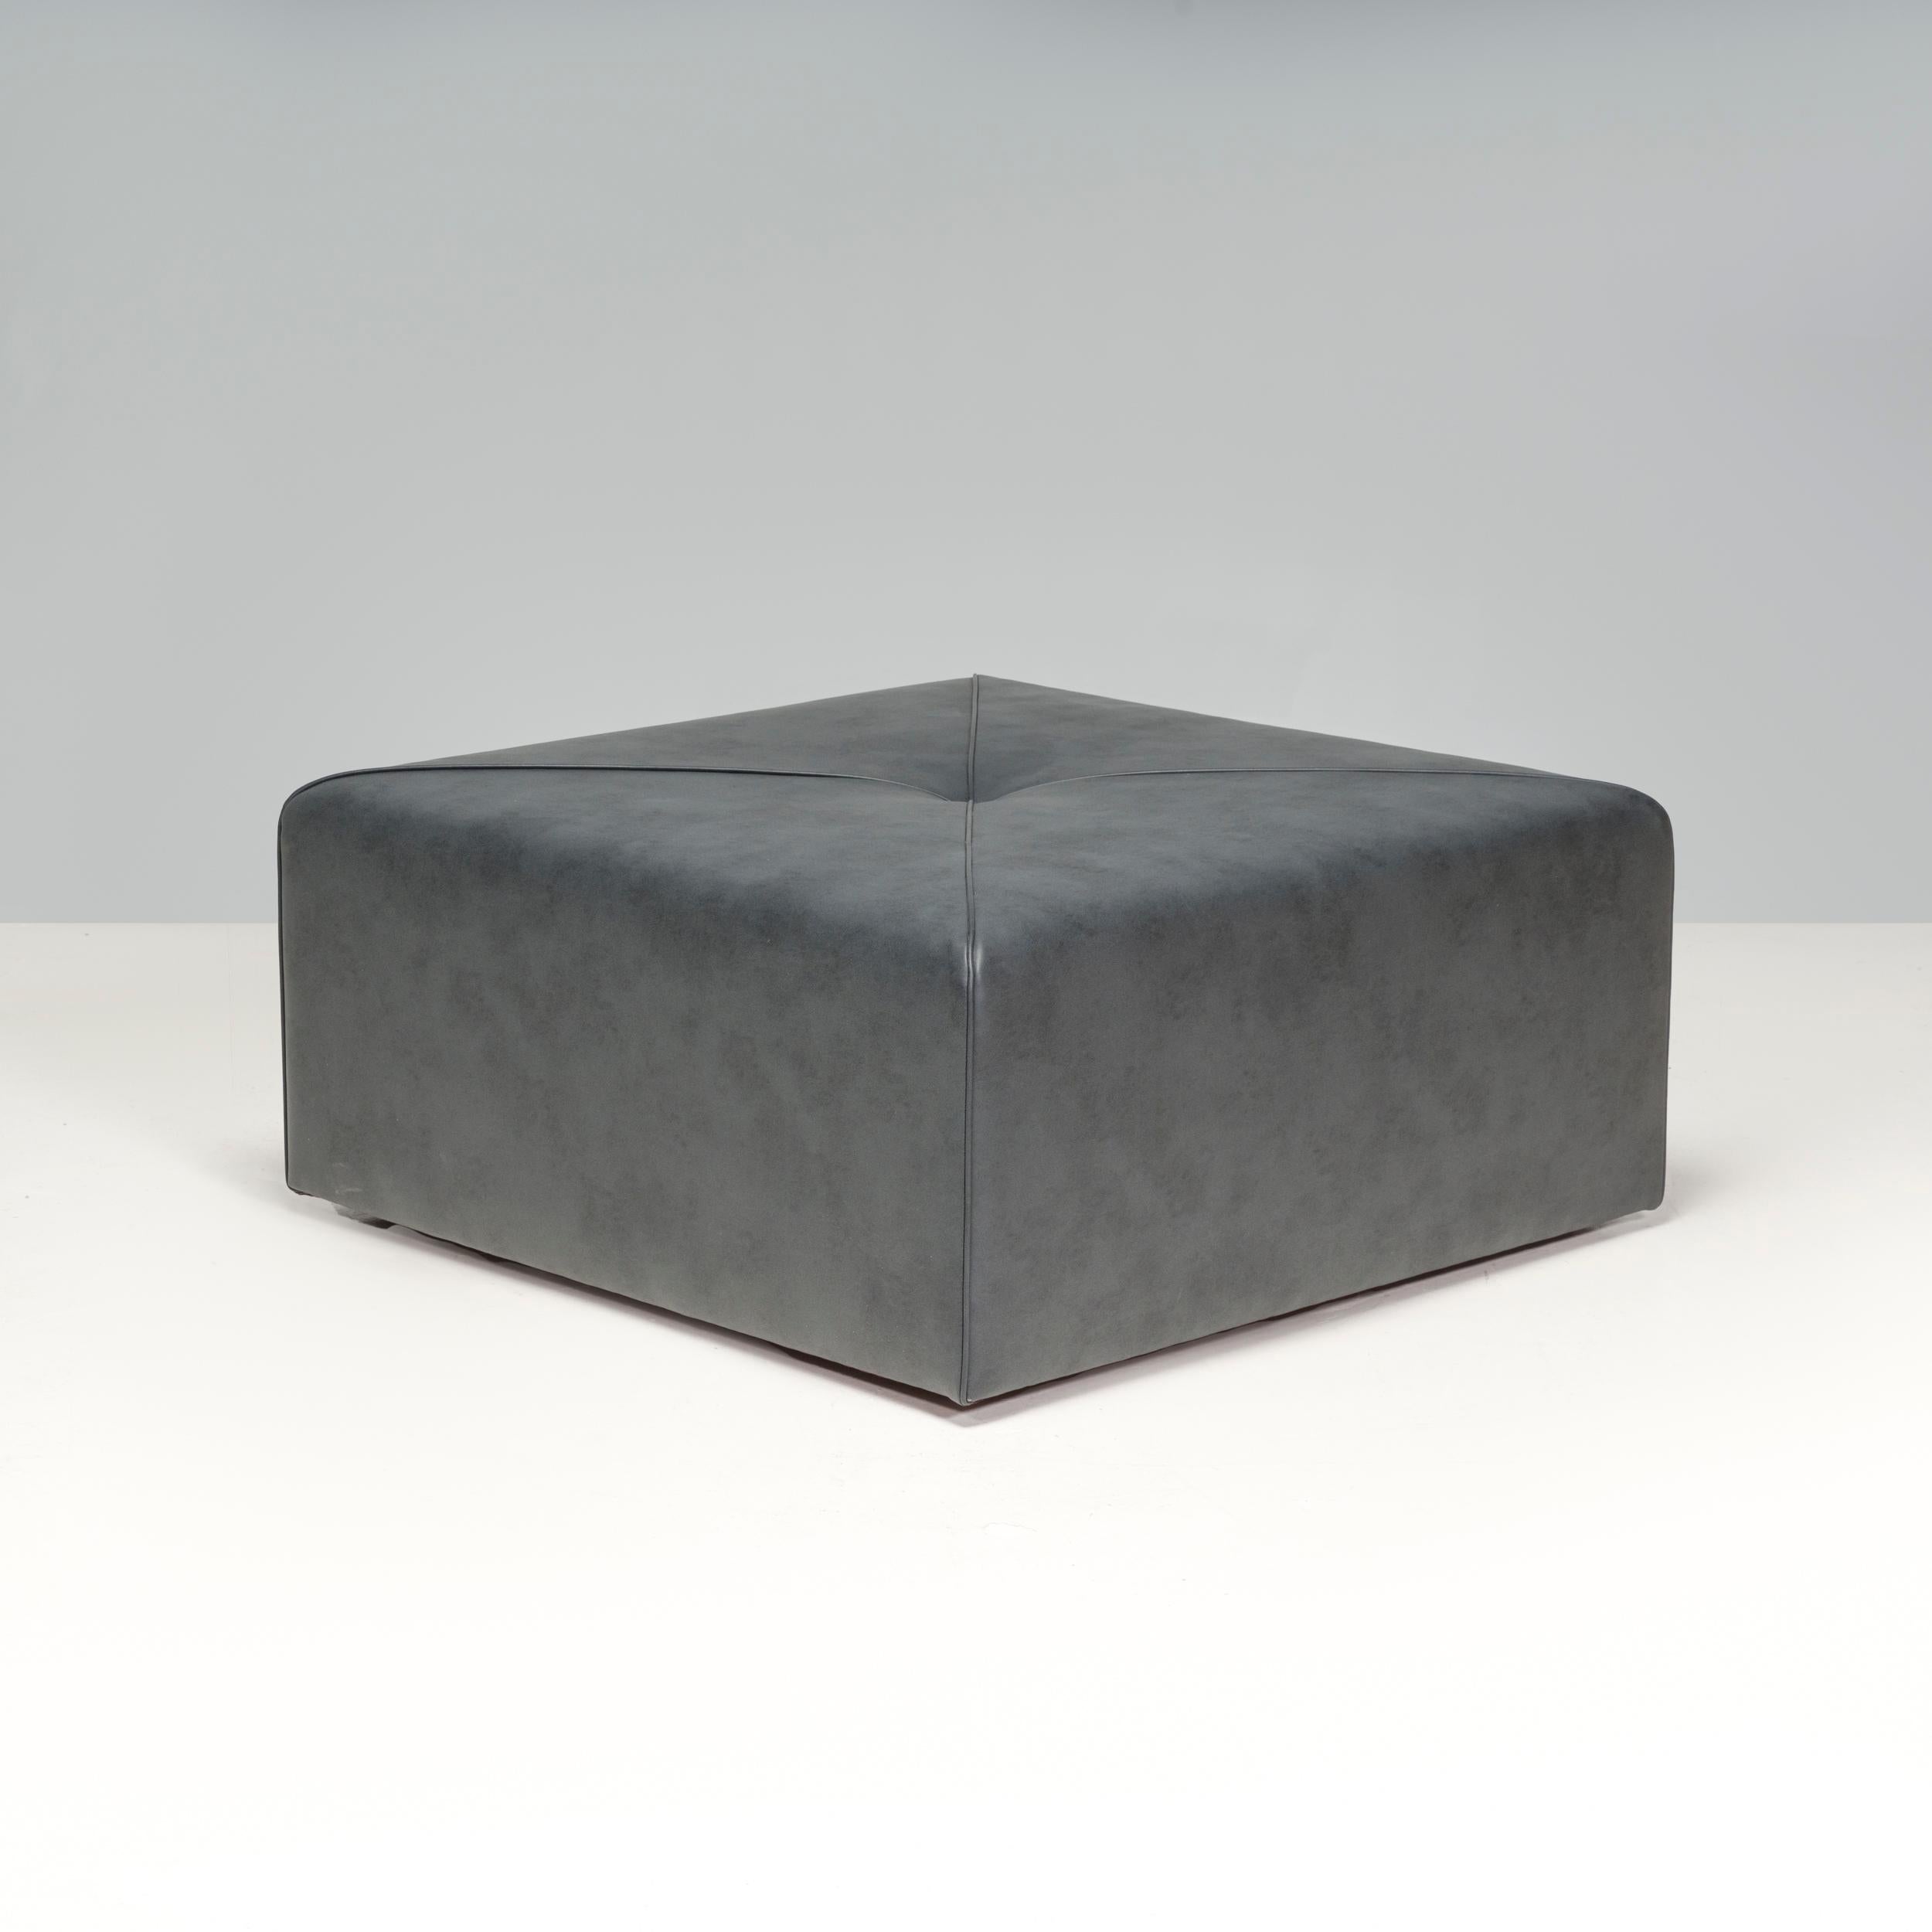 Bespoke Dark Grey Leather Square Ottoman In Good Condition For Sale In London, GB